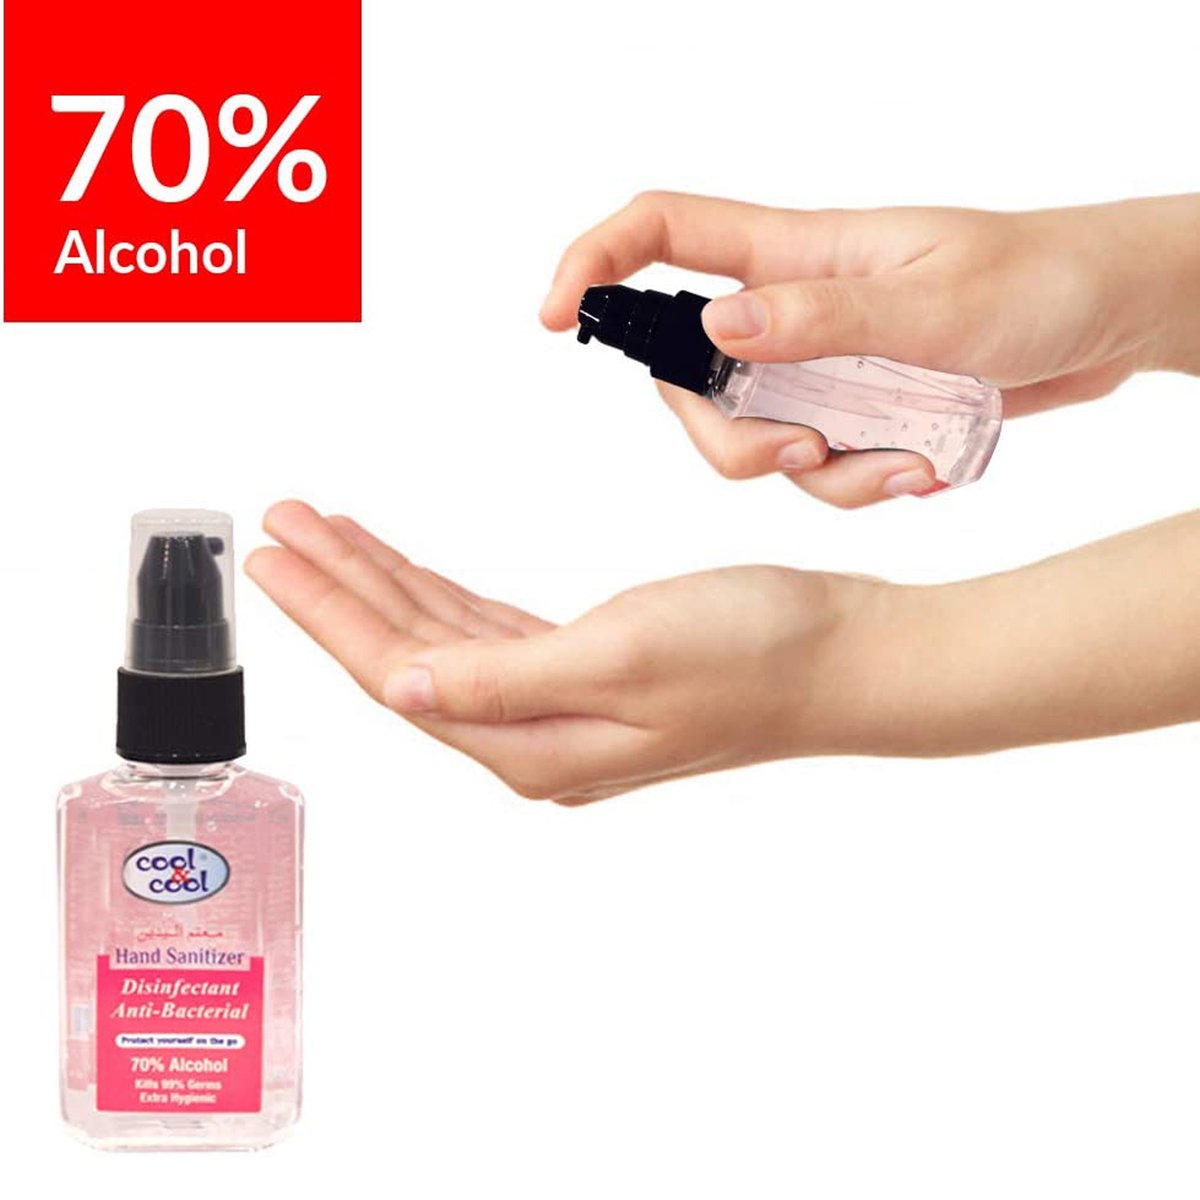 Cool & Cool Anti-Bacterial Disinfectant Hand Sanitizer 60 ml